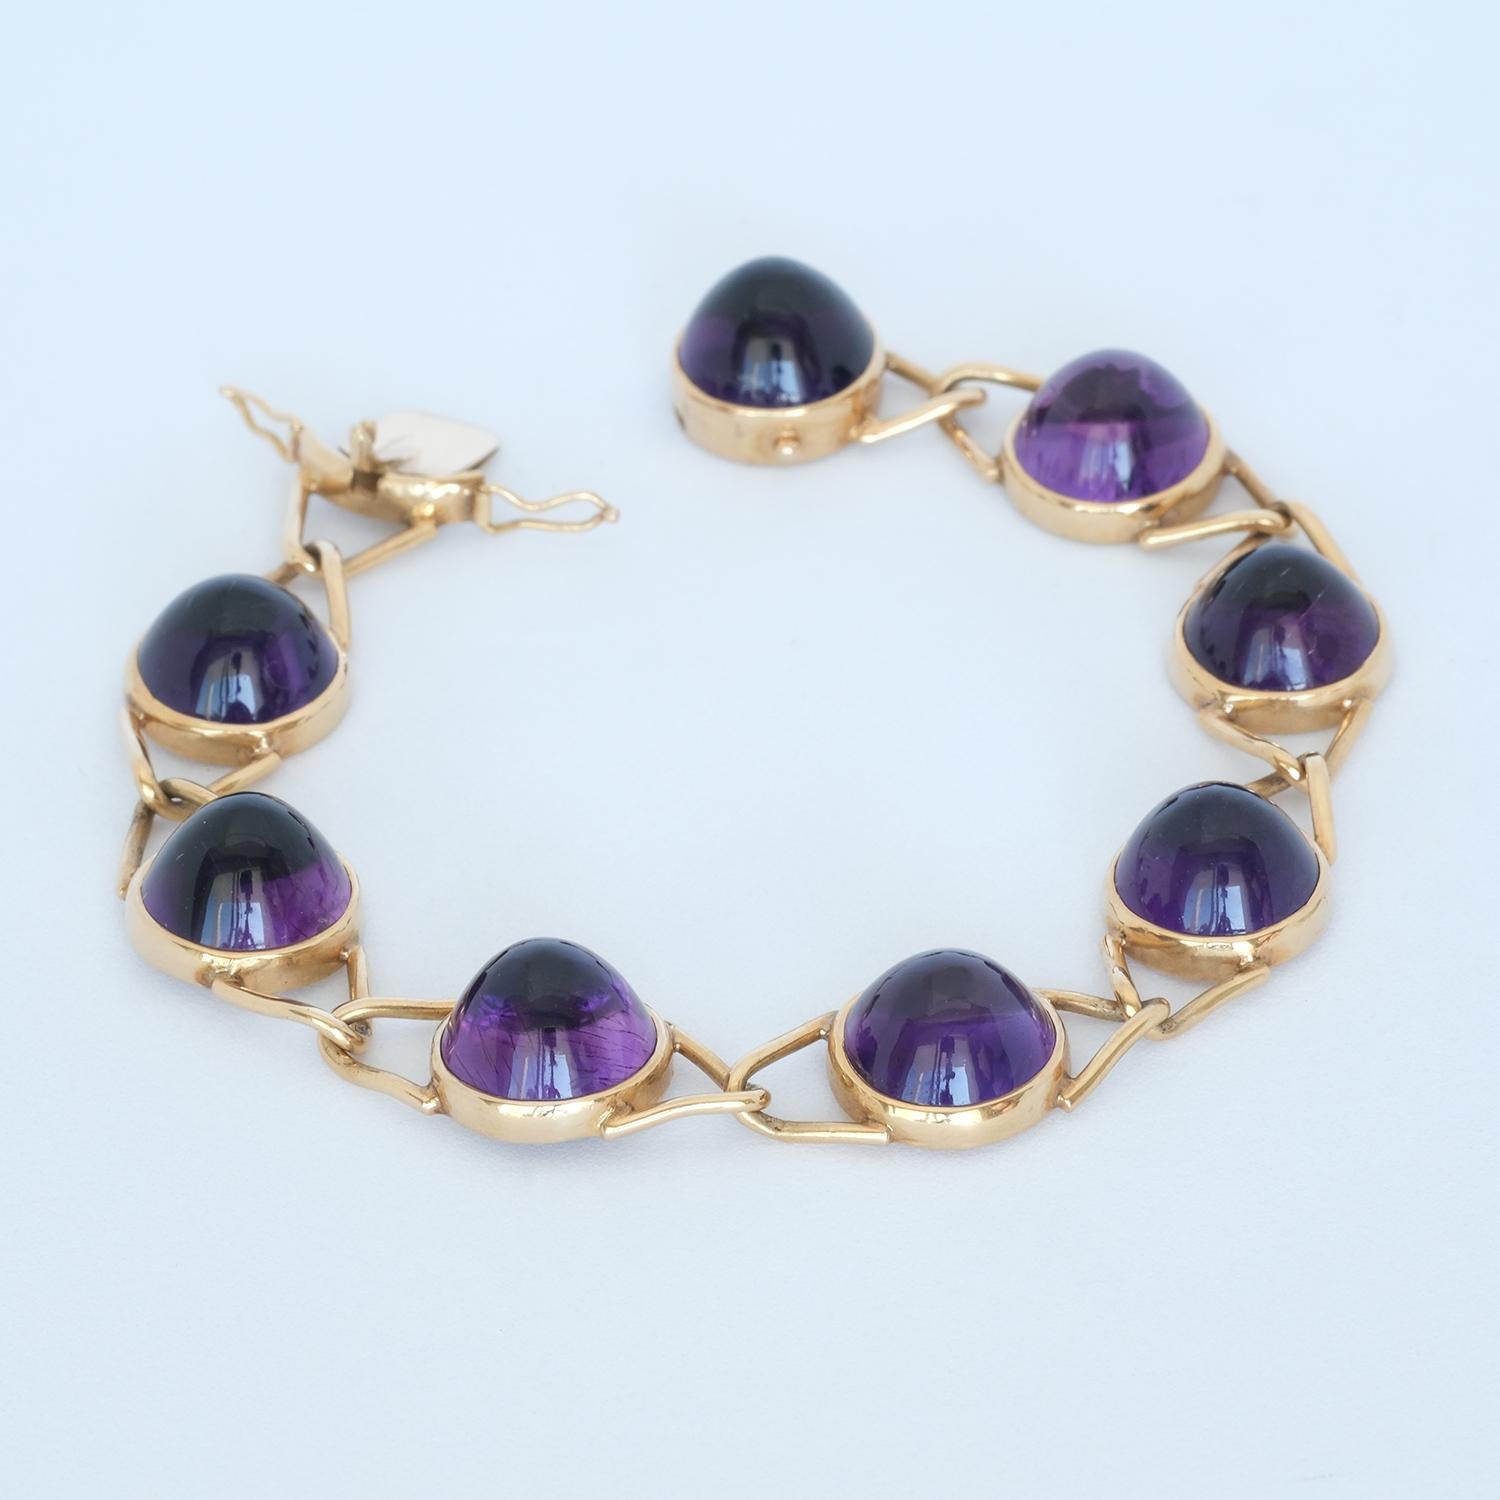 This 18 karat gold bracelet is adorned with eight dark purple cabochon cut amethysts. The bracelet closes with a box clasp with safety locks.

The bracelet has a traditional, classic style and is what we would call a day to day bracelet.